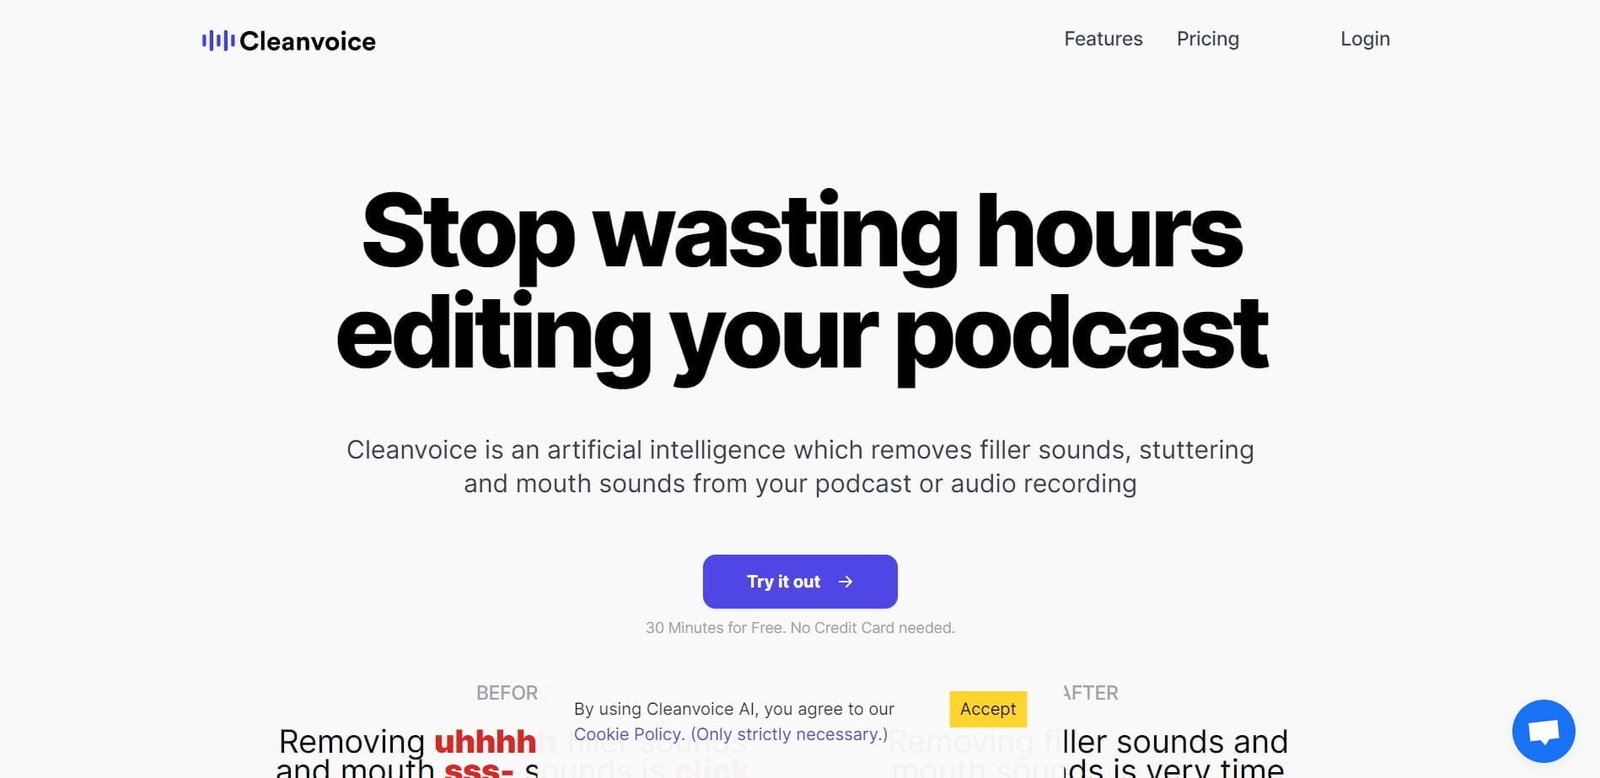 Cleanvoice is an AI platform to streamline the process of editing podcasts and audio recordings.